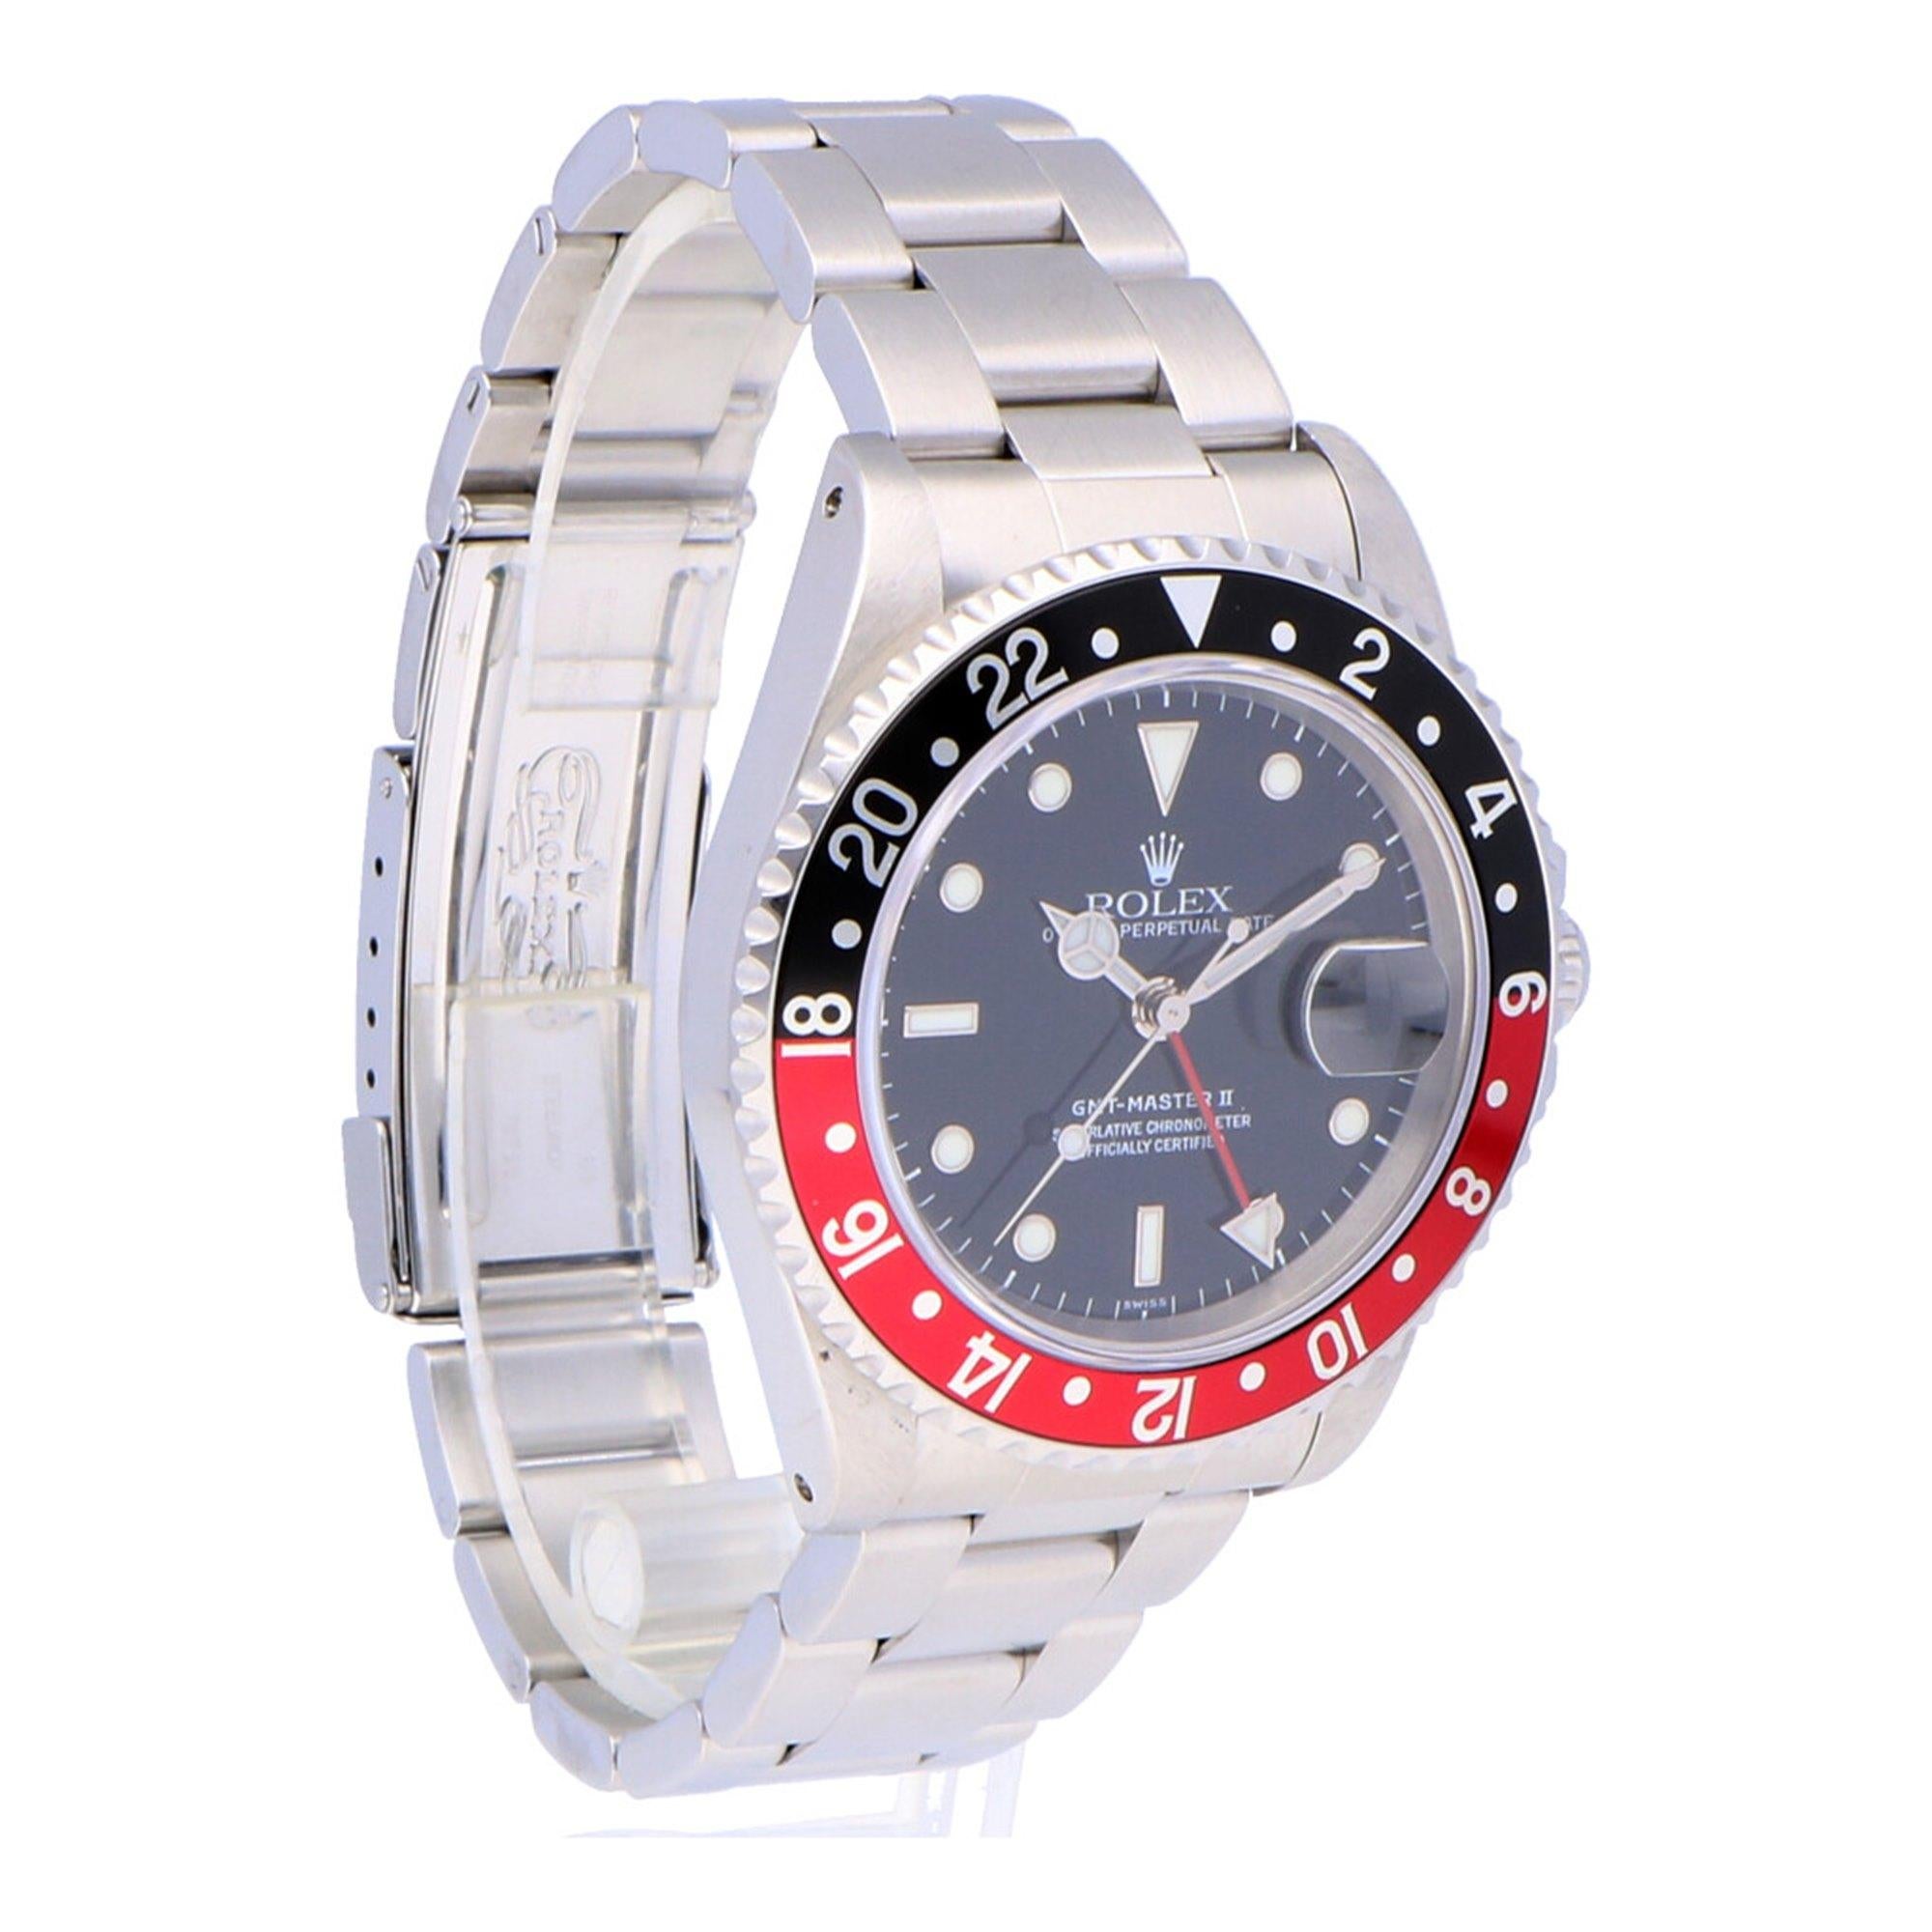 Pre-Owned Rolex Gmt-Master II Stainless Steel 16710 Watch 4